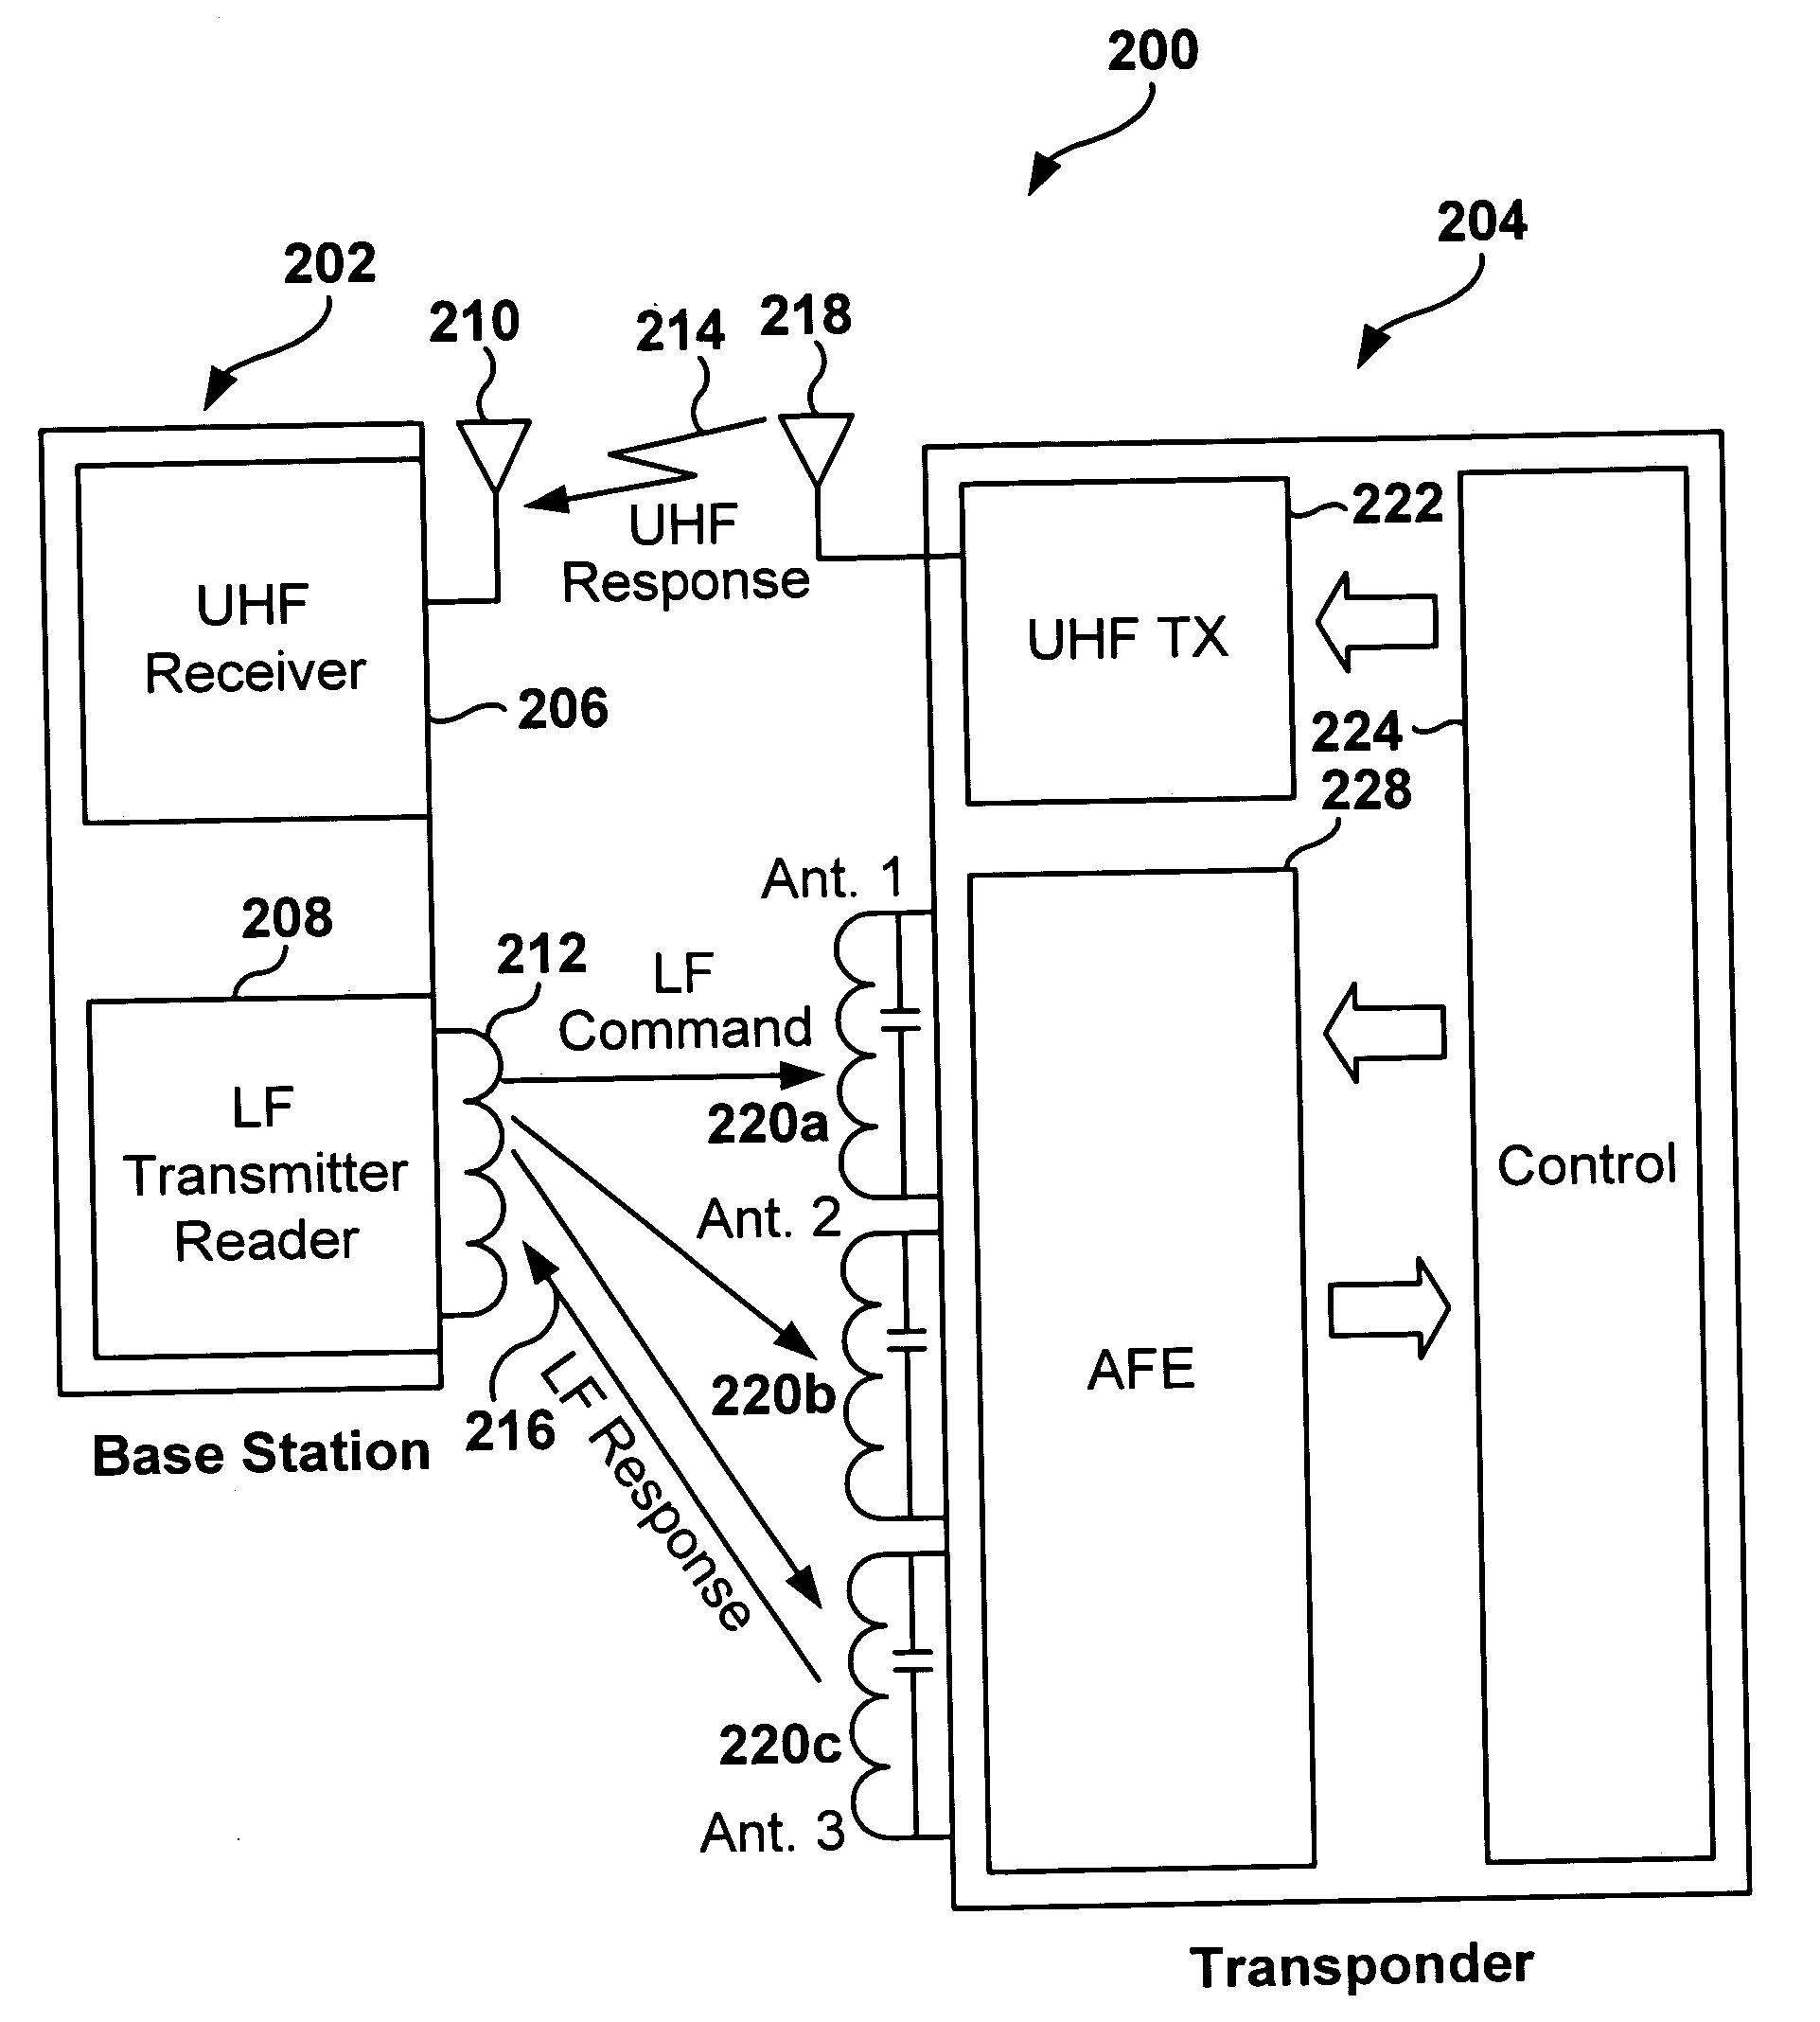 Dynamic configuration of a radio frequency transponder